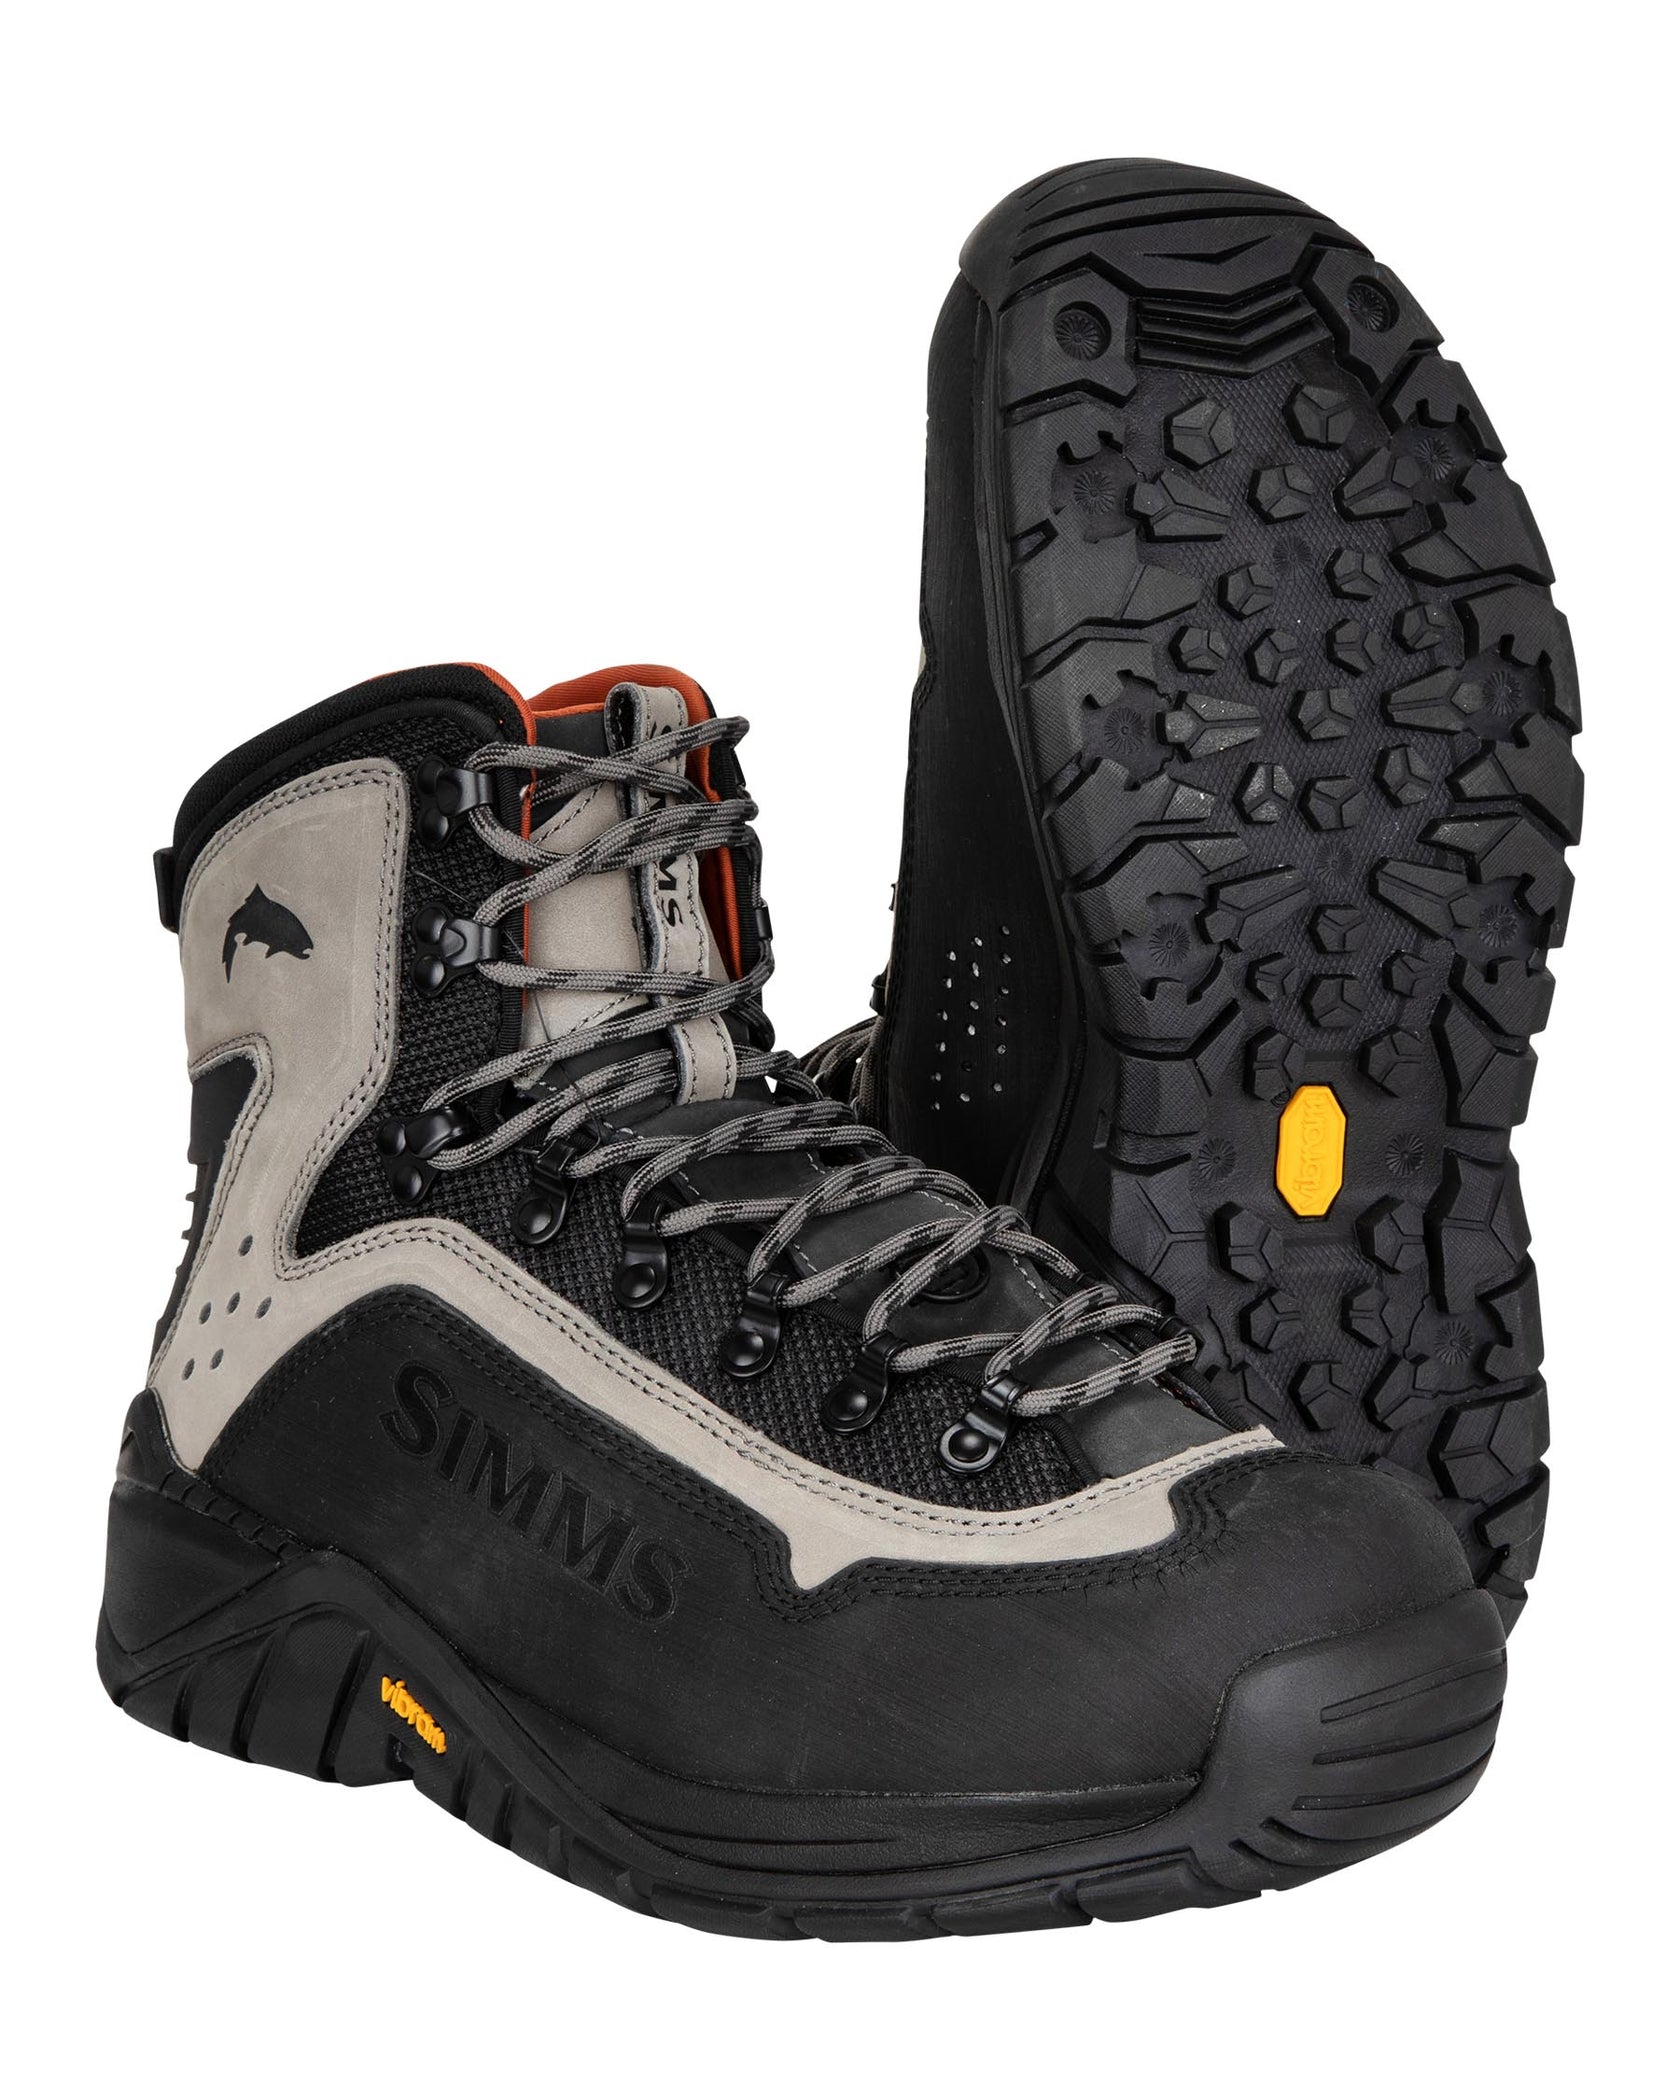 Simms G3 Guide Wading Boot 13 / Steel Grey